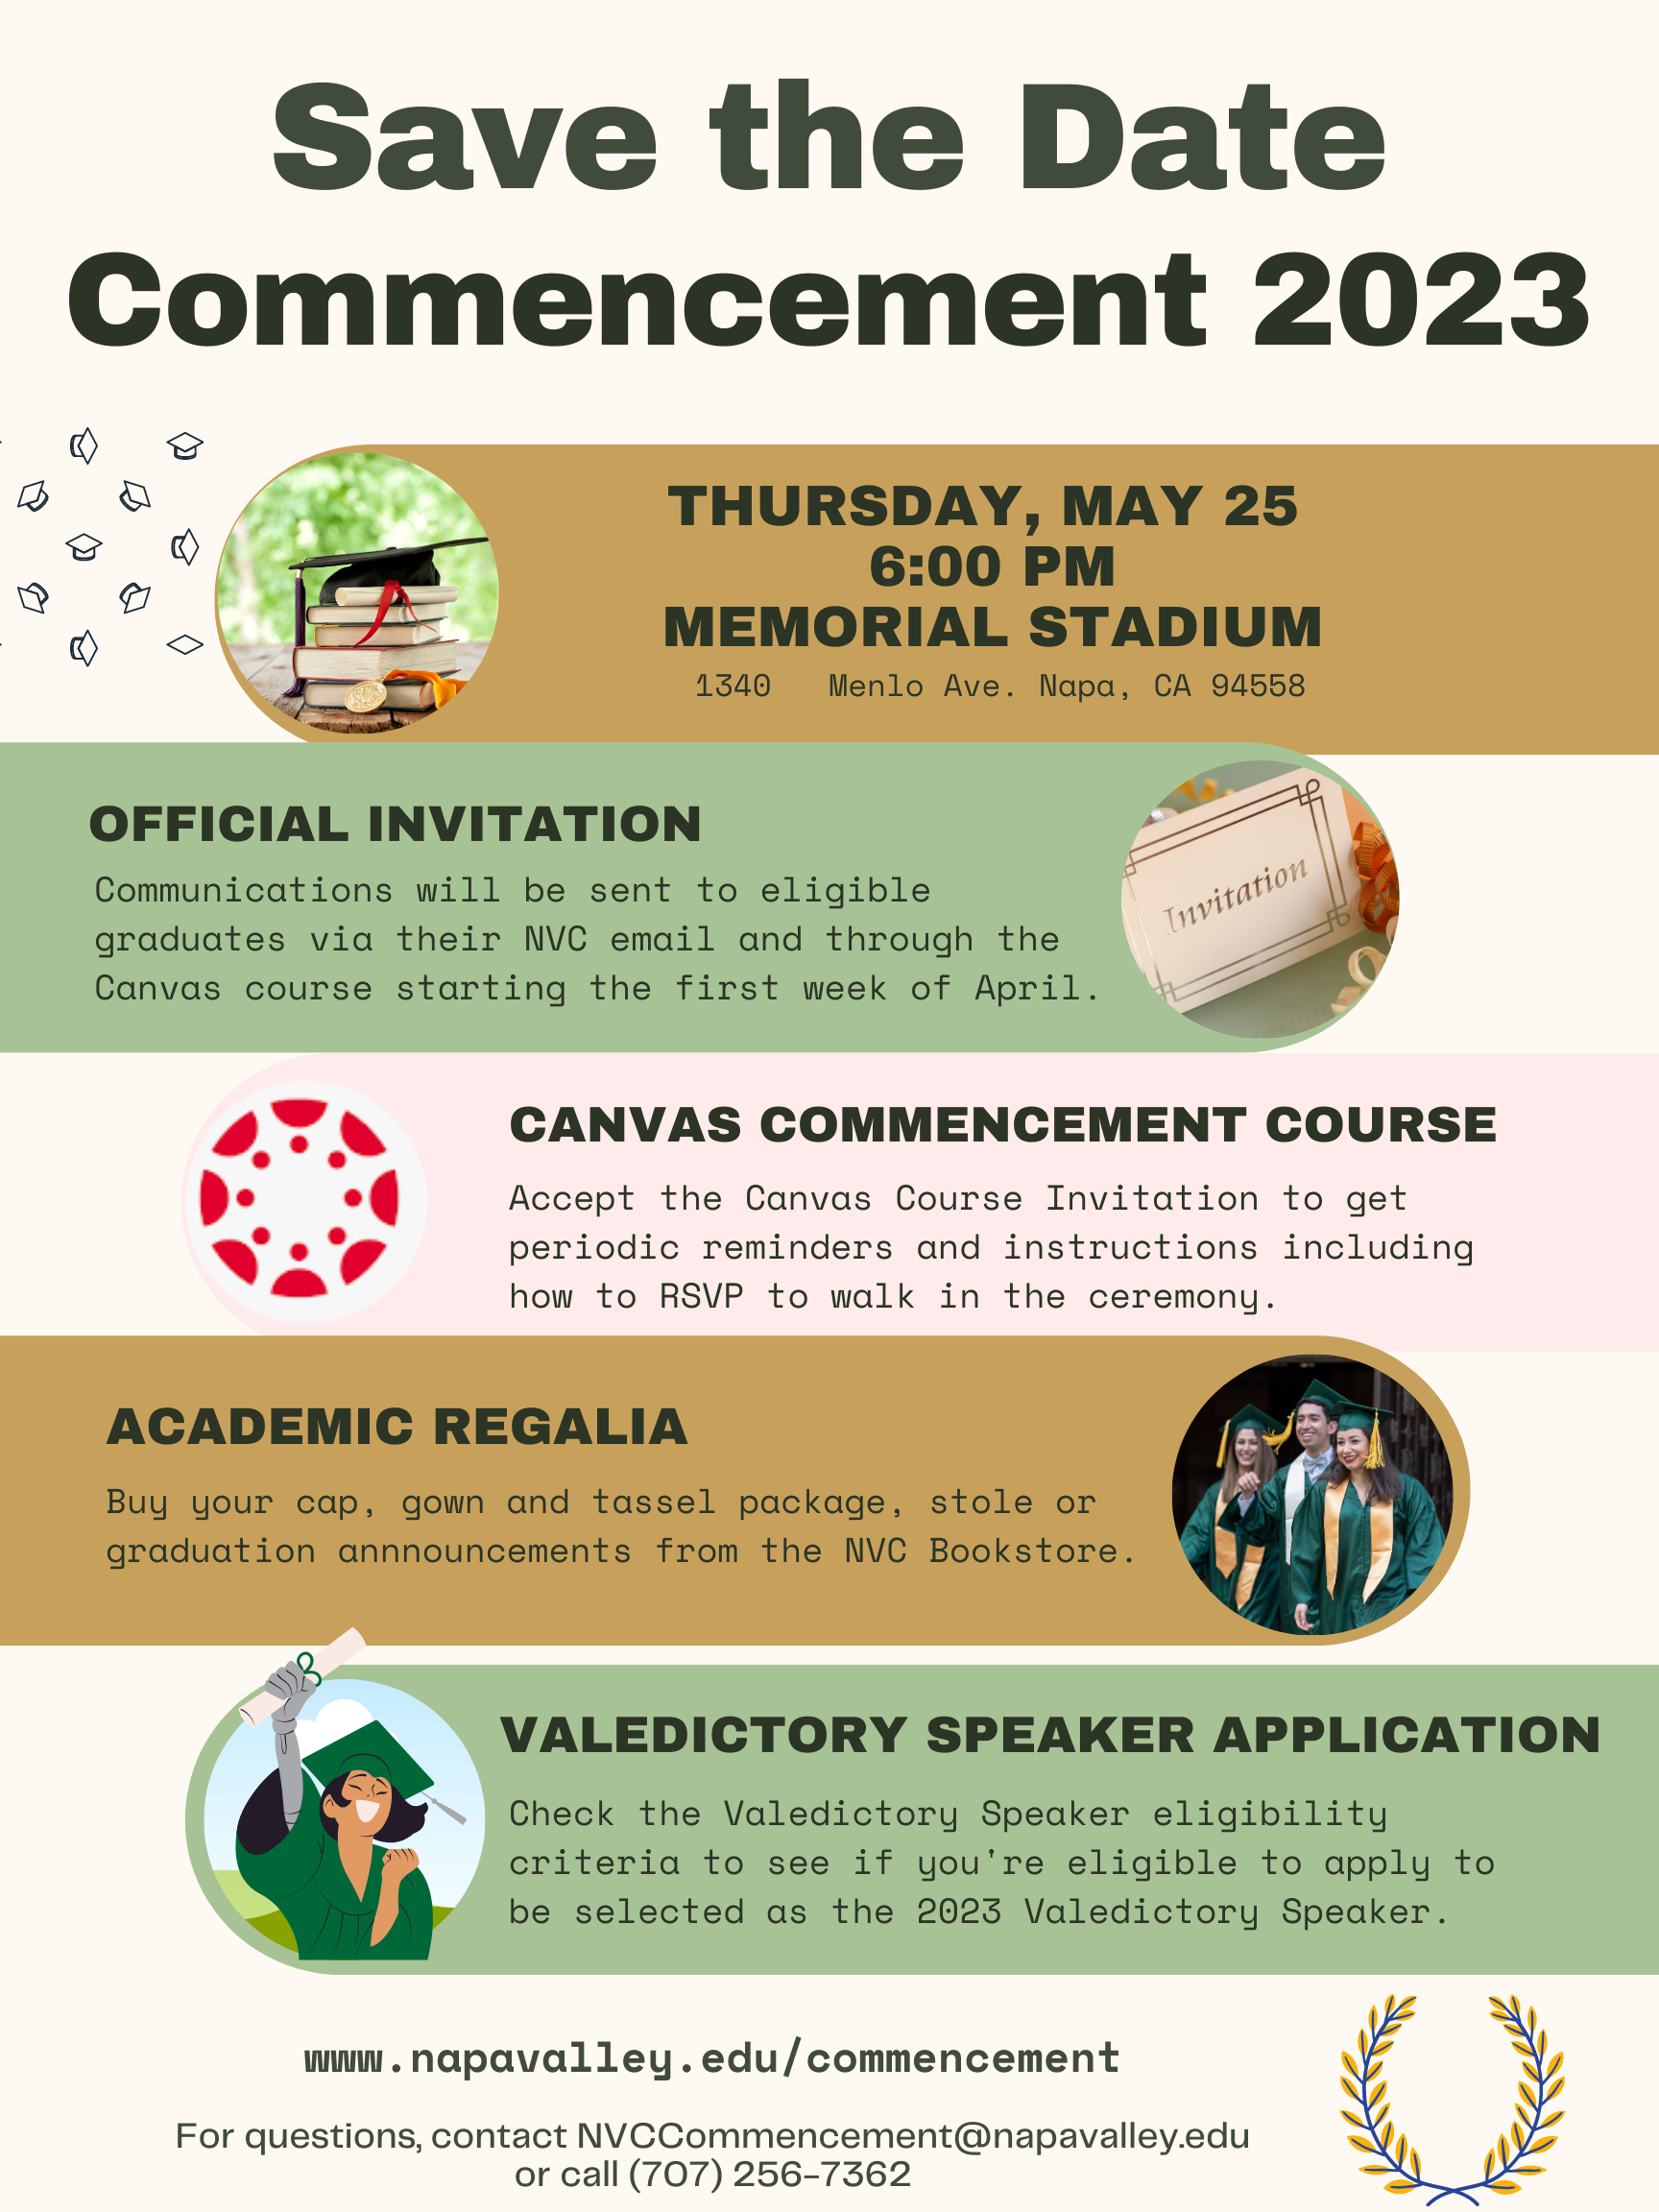 Save the Date www.napavalley.edu/commencement For questions, contact NVCCommencement@napavalley.edu or call (707) 256-7362 THURSDAY, MAY 25 6:00 PM MEMORIAL STADIUM 1340 Menlo Ave. Napa, CA 94558 OFFICIAL INVITATION Communications will be sent to eligible graduates via their NVC email and through the Canvas course starting the first week of April. CANVAS COMMENCEMENT COURSE Accept the Canvas Course Invitation to get periodic reminders and instructions including how to RSVP to walk in the ceremony. ACADEMIC REGALIA Buy your cap, gown and tassel package, stole or graduation annnouncements from the NVC Bookstore. VALEDICTORY SPEAKER APPLICATION Check the Valedictory Speaker eligibility criteria to see if you're eligible to apply to be selected as the 2023 Valedictory Speaker